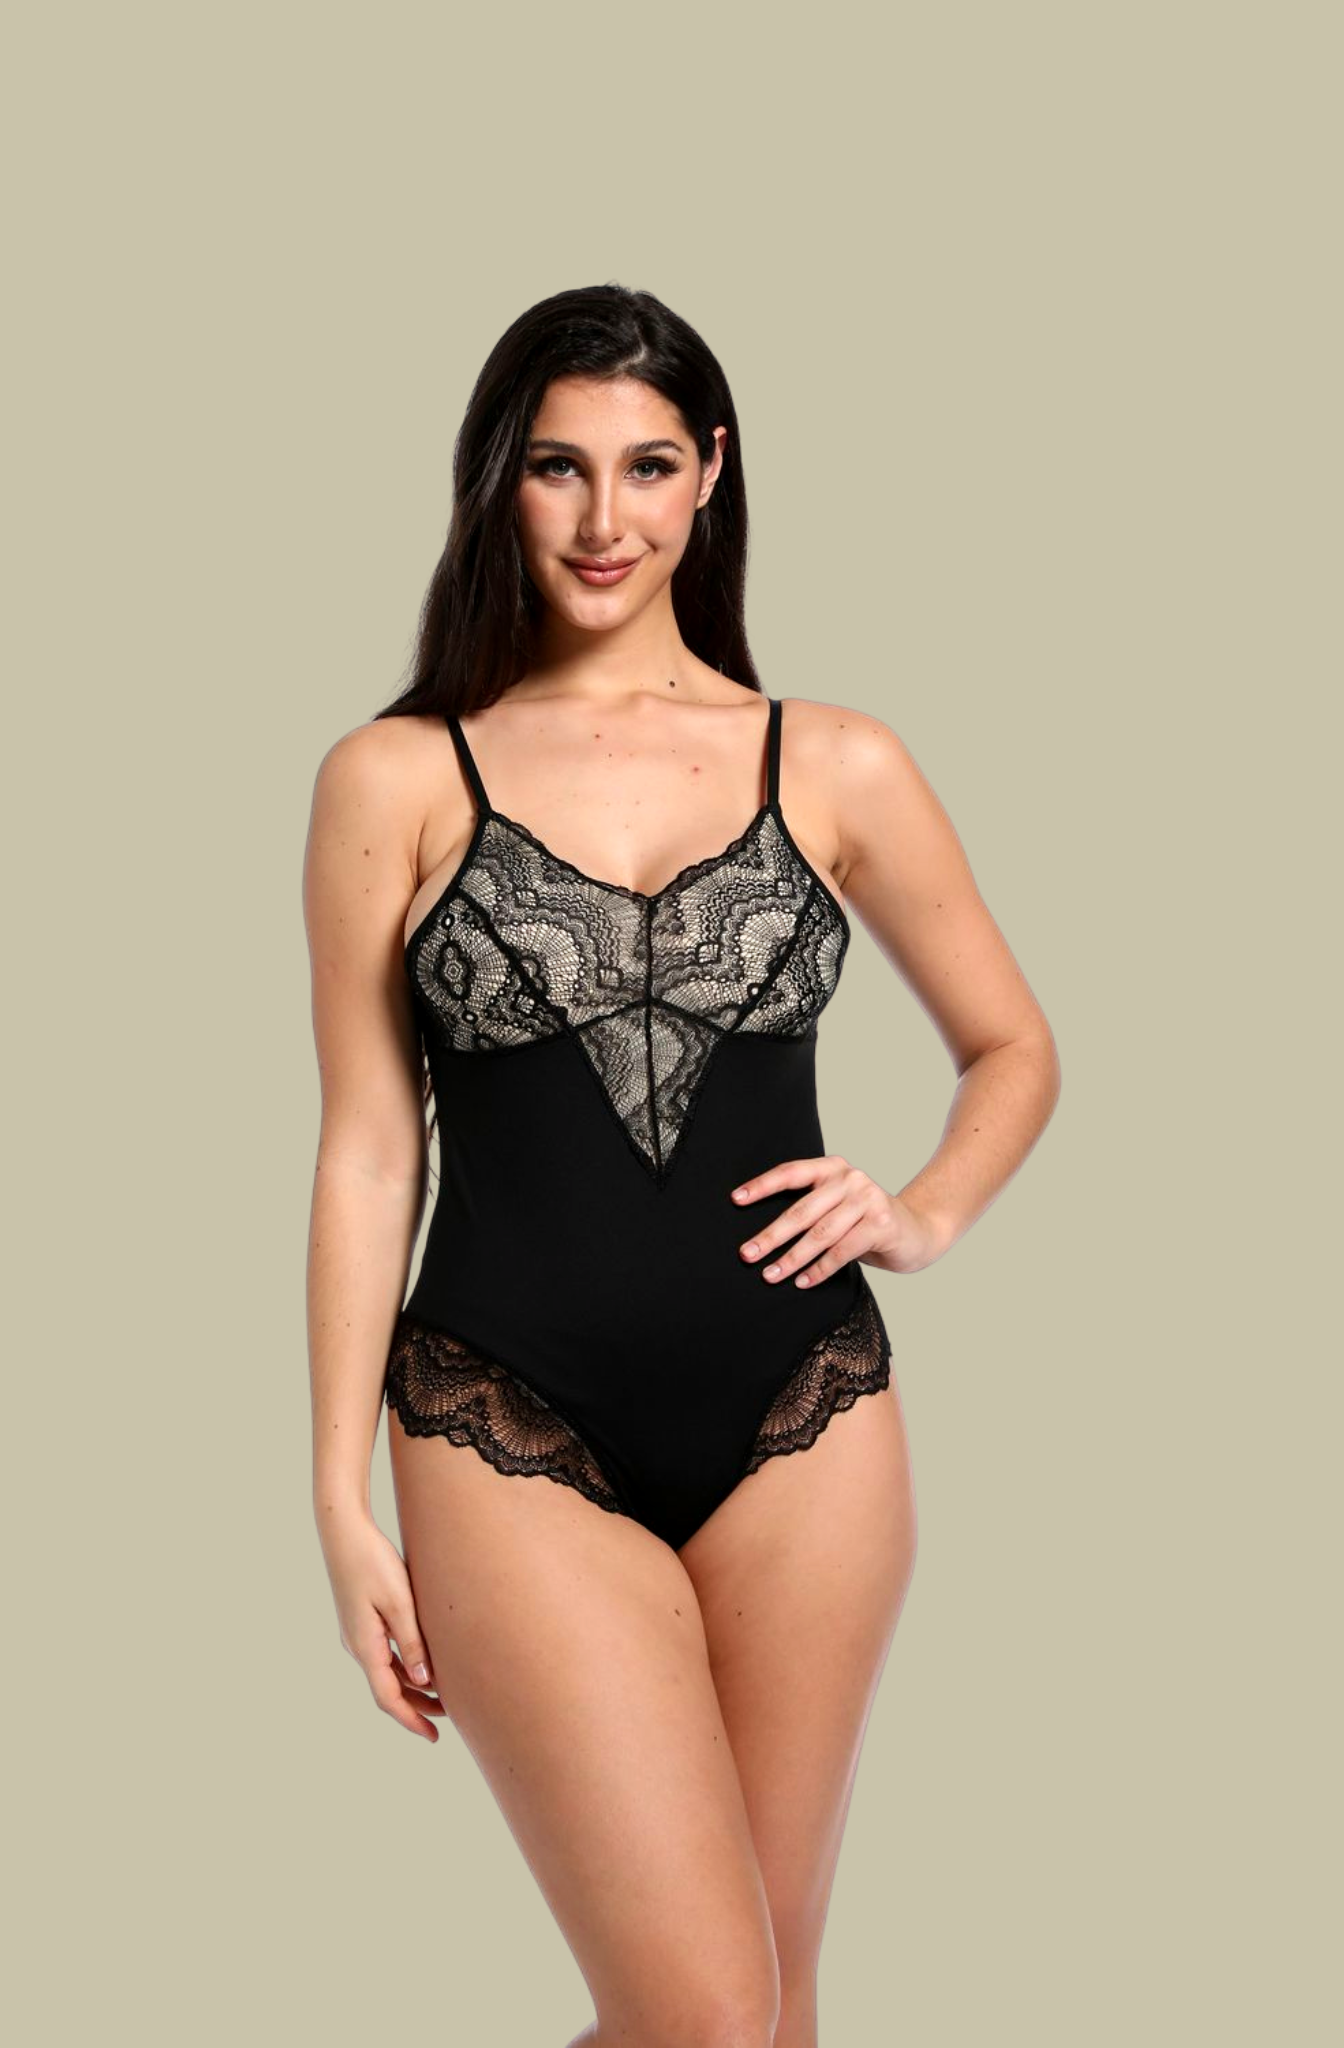 If you get this lace shapewear bodysuit, make sure you size up! Happy